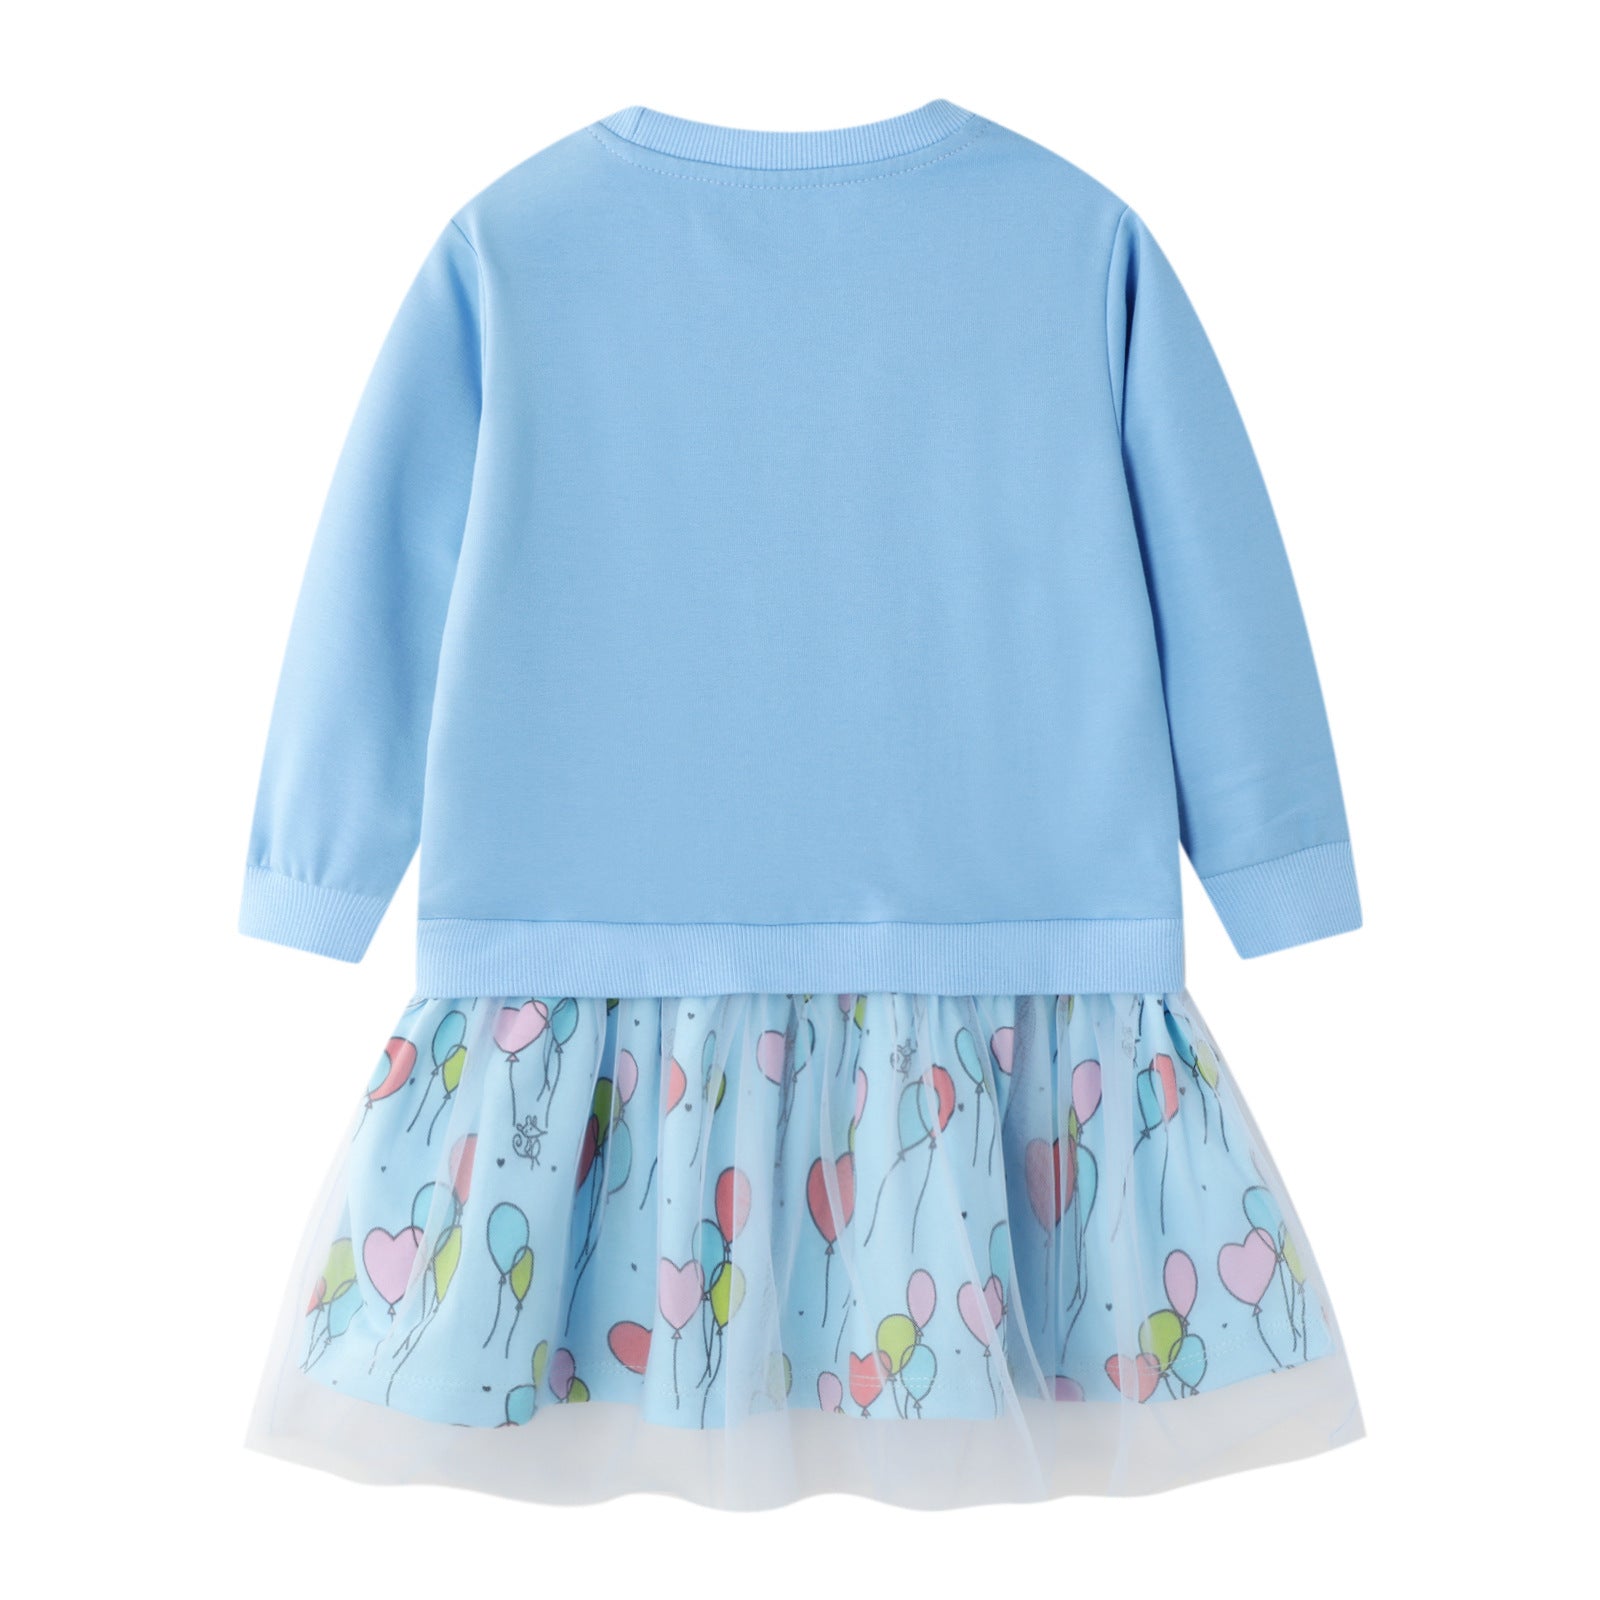 Sweaters Wholesale Pure Cotton Long Sleeve Children's Sweater Skirt